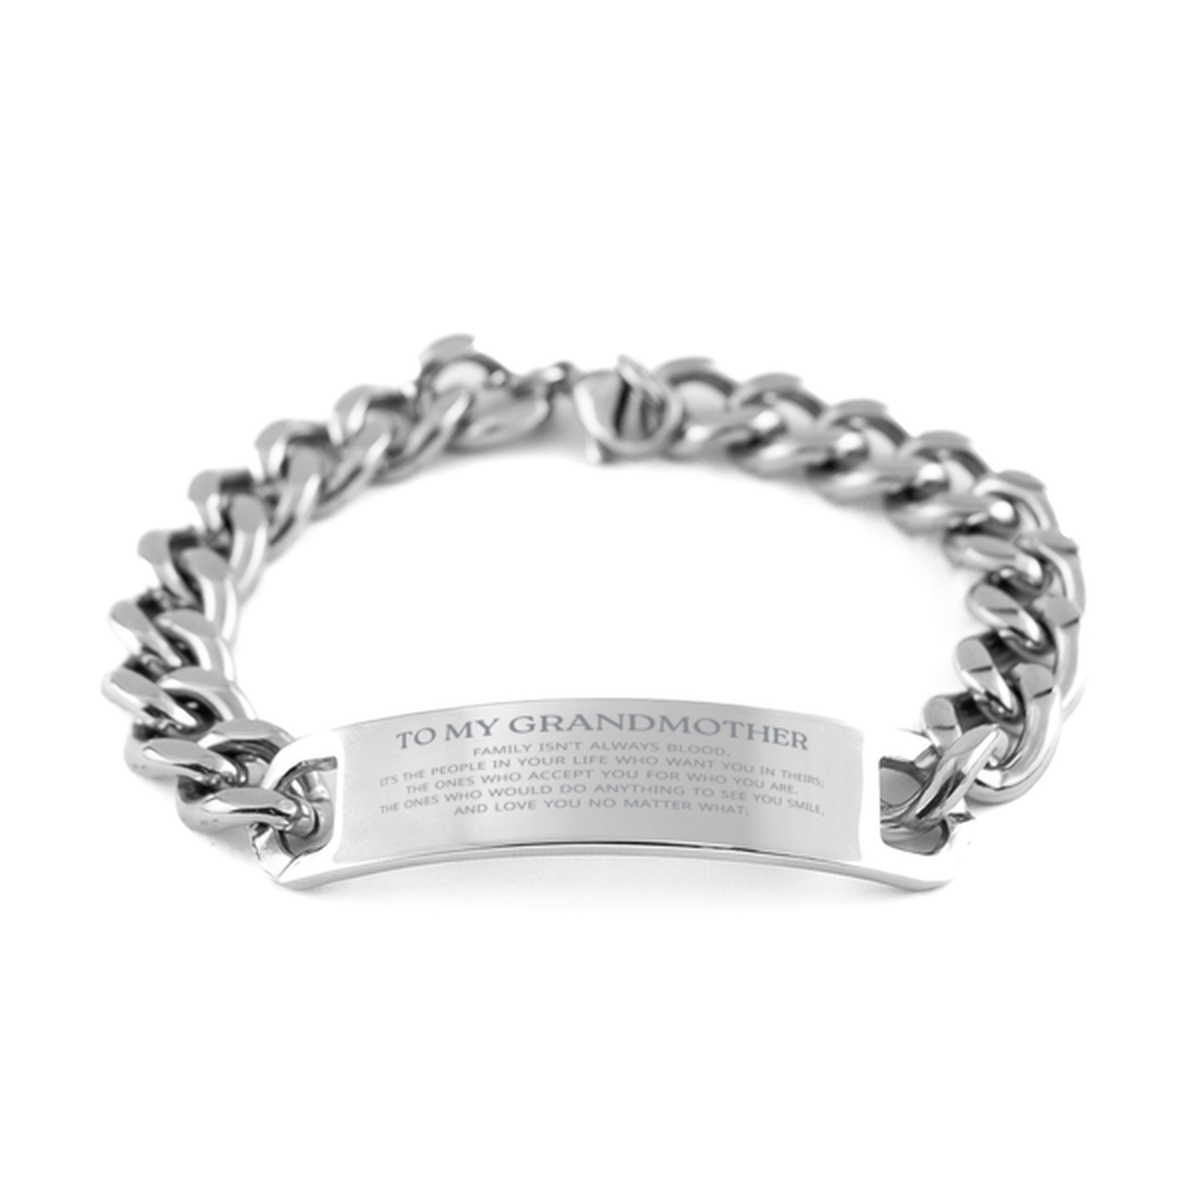 To My Grandmother Gifts, Family isn't always blood, Grandmother Cuban Chain Stainless Steel Bracelet, Birthday Christmas Unique Present For Grandmother